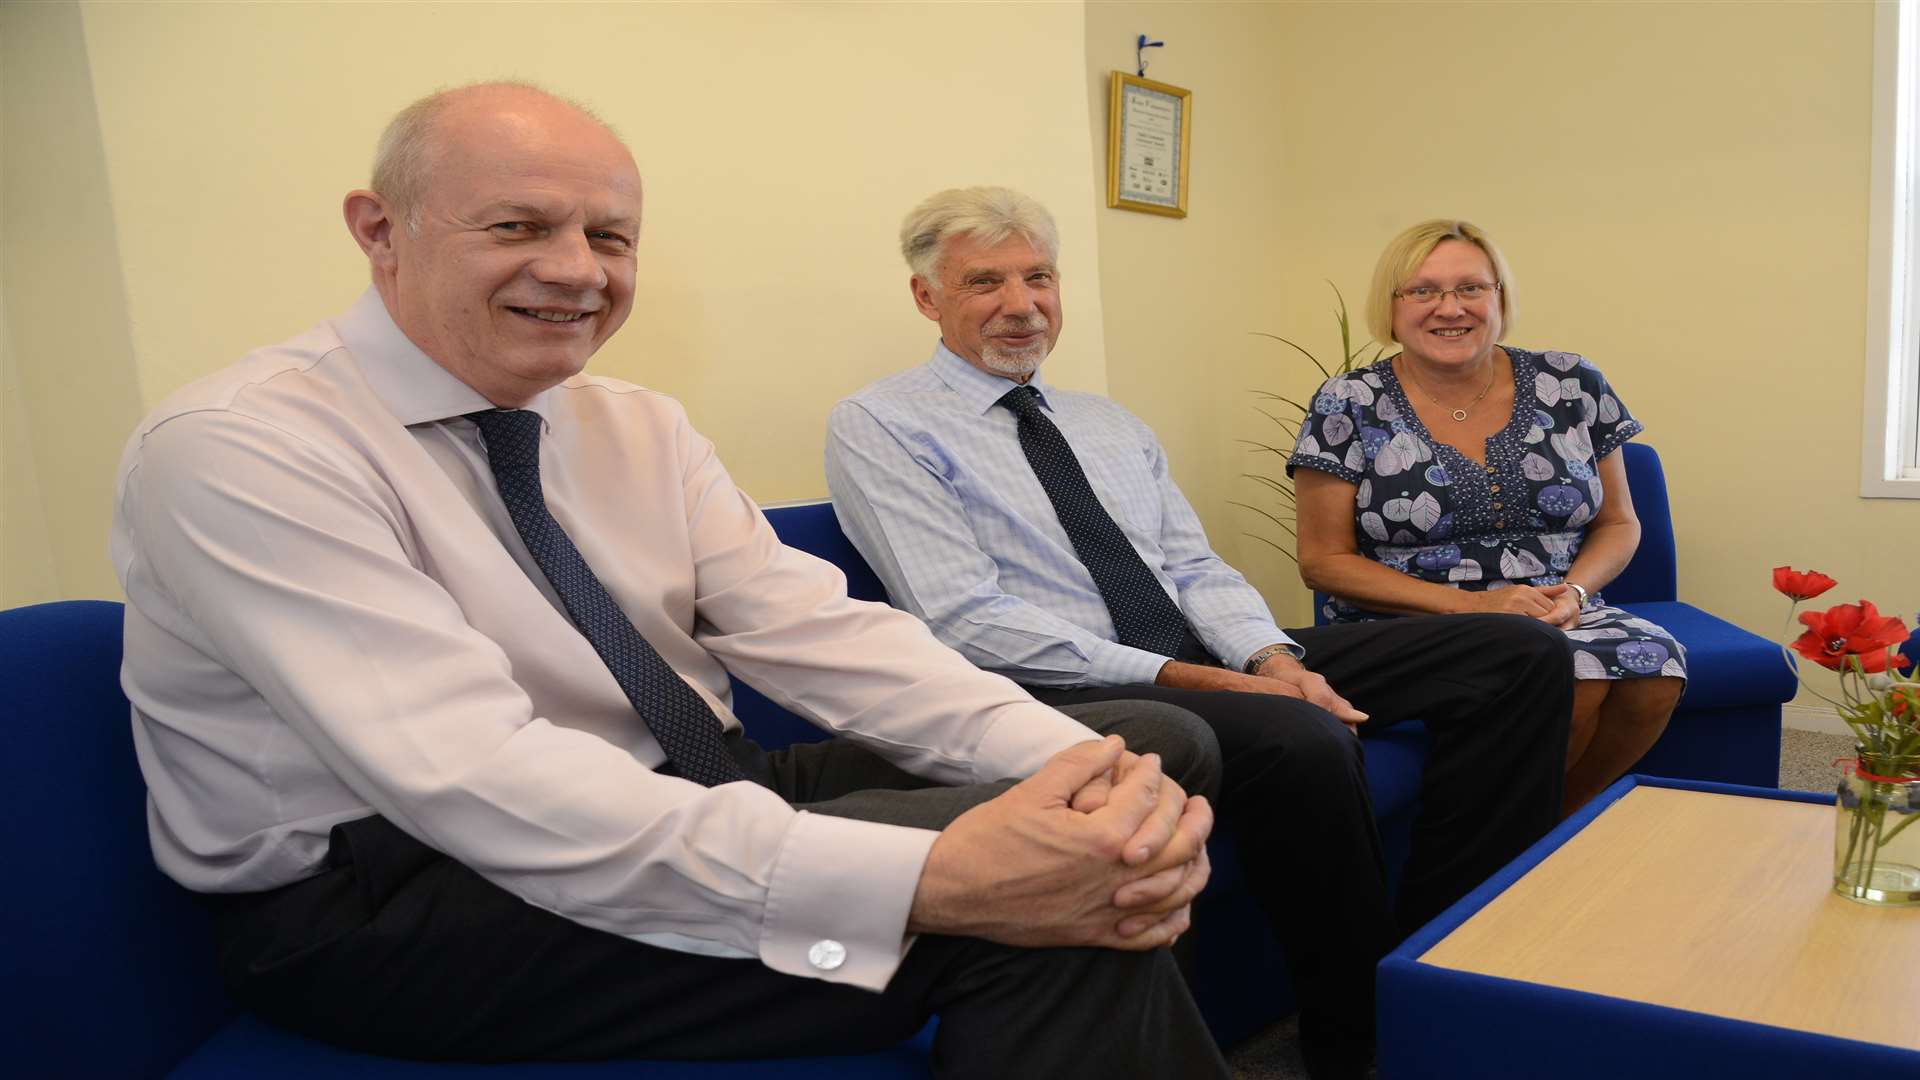 MP Damian Green with Ray Hulme and Director of Ashford Samaritans branch Lesley Sutton